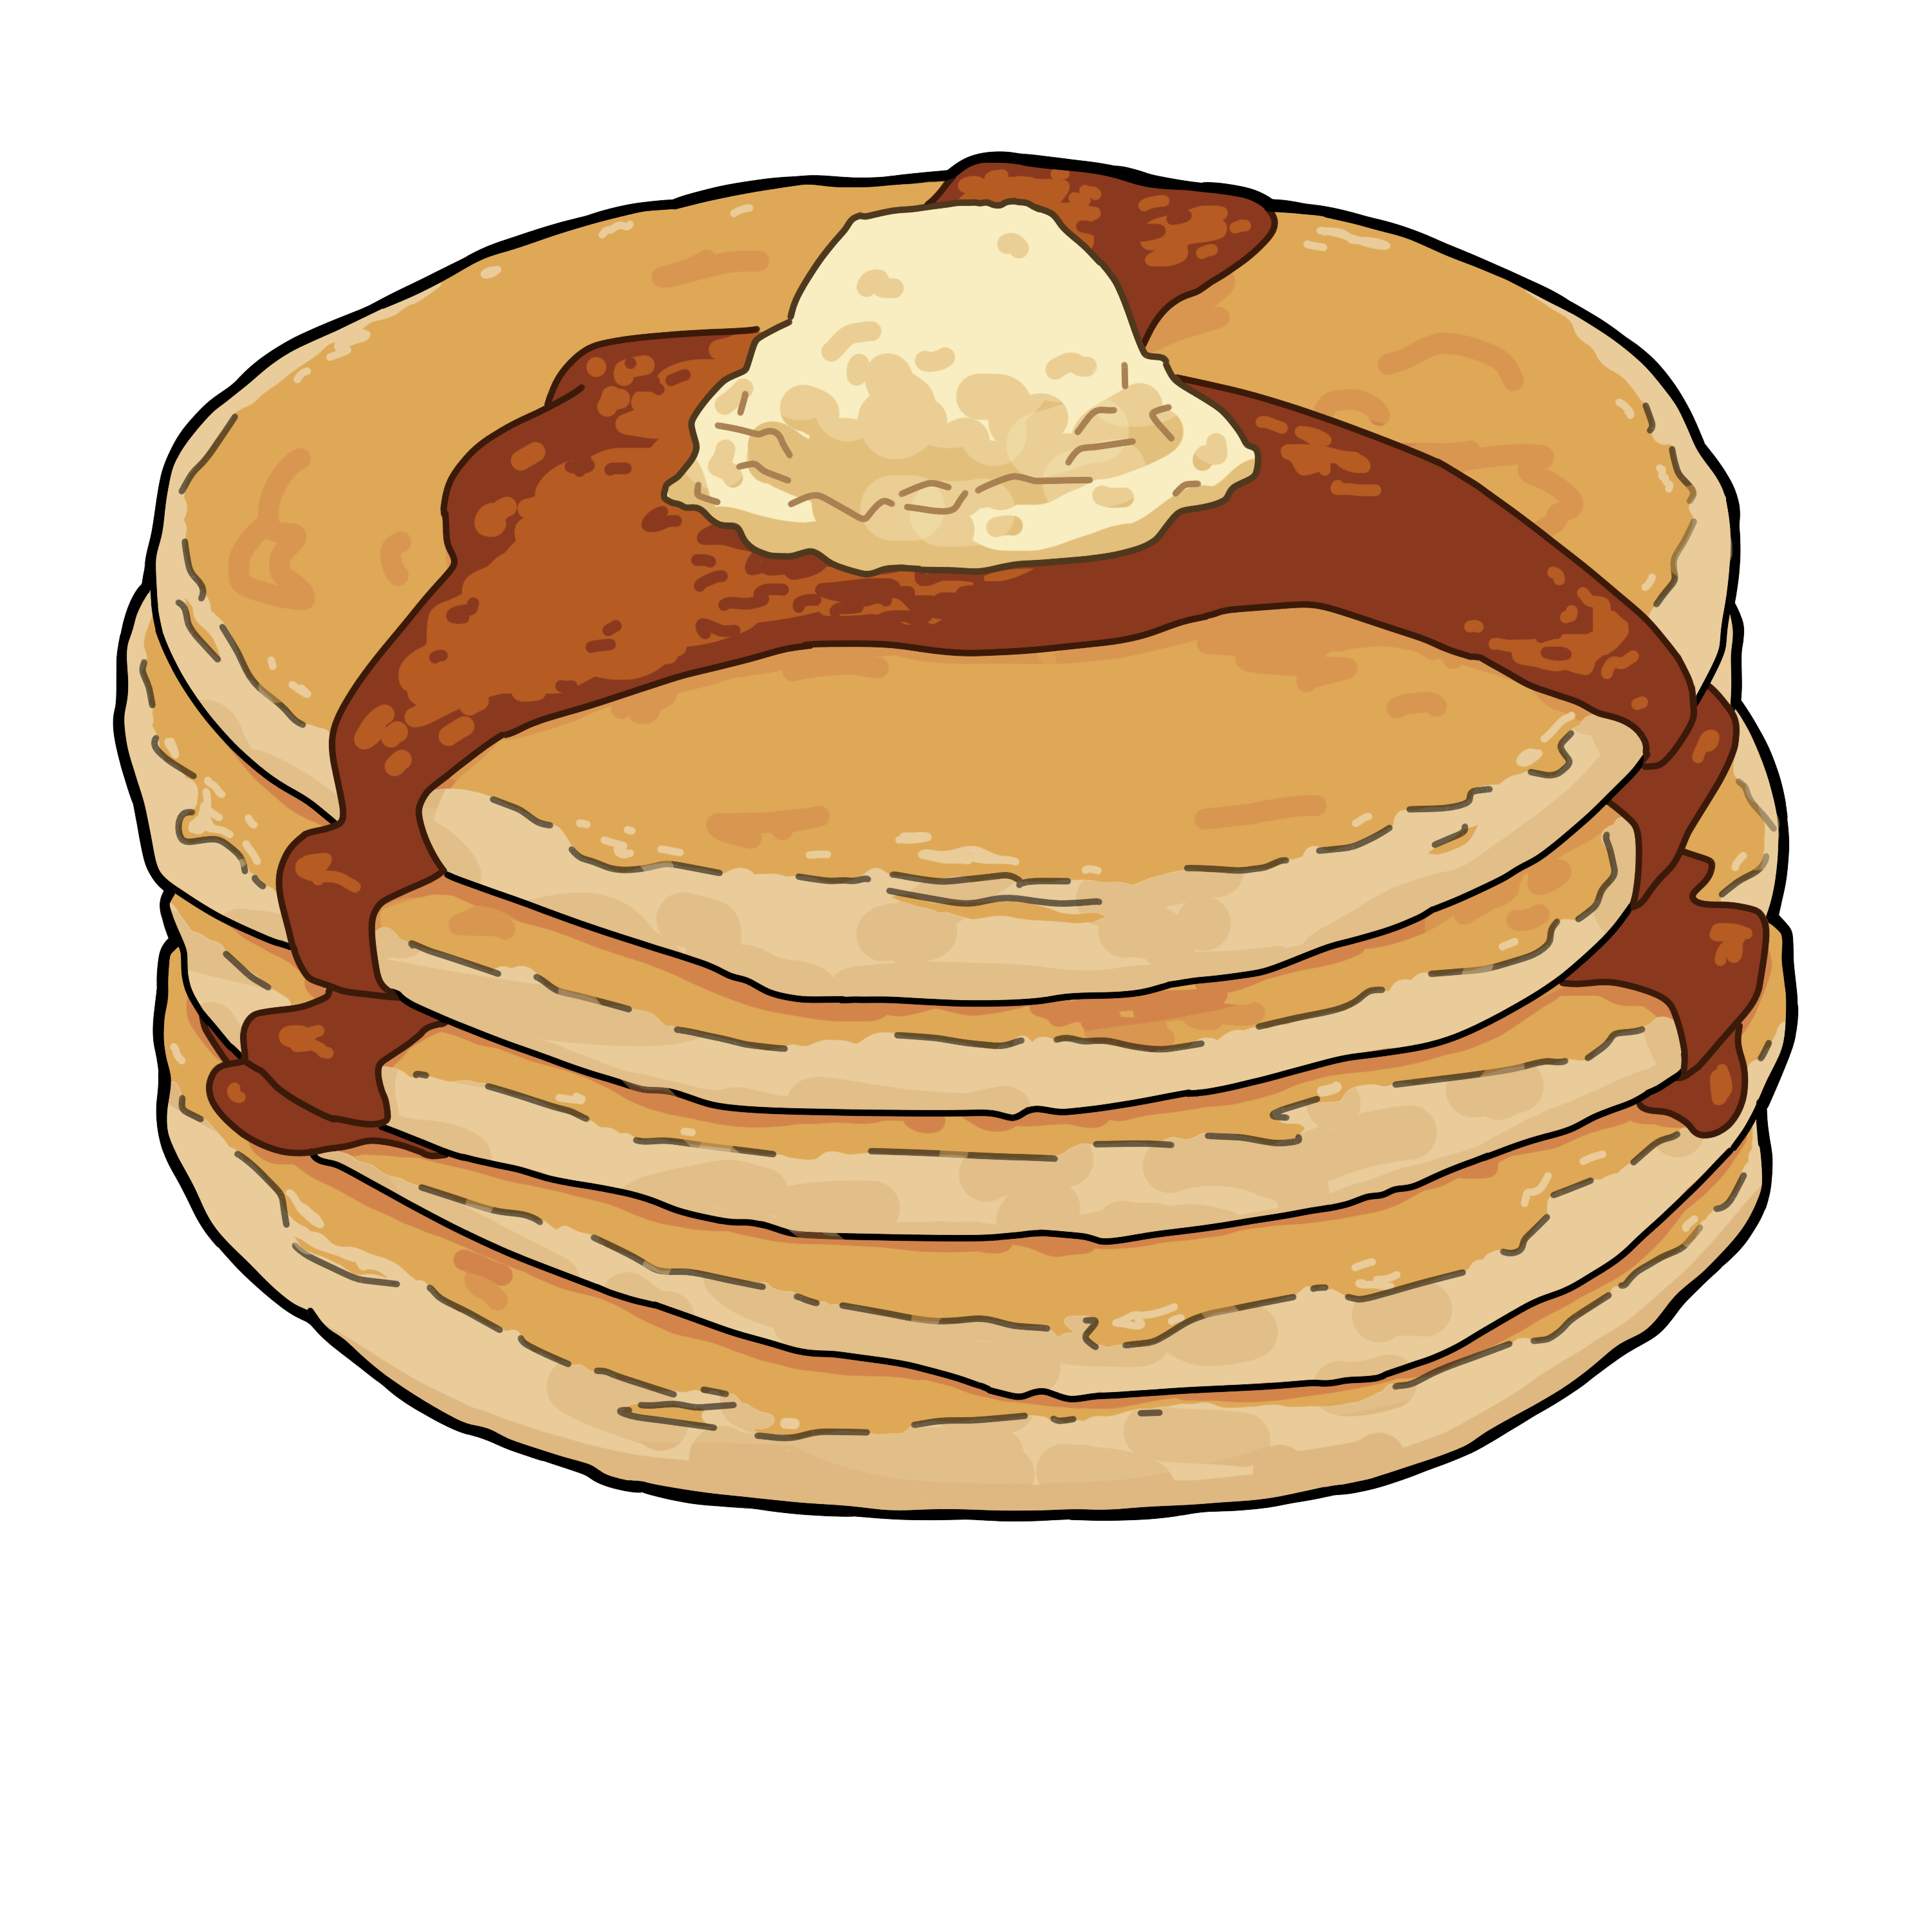 Ipad pancakes drawing my. Coconut clipart drawn